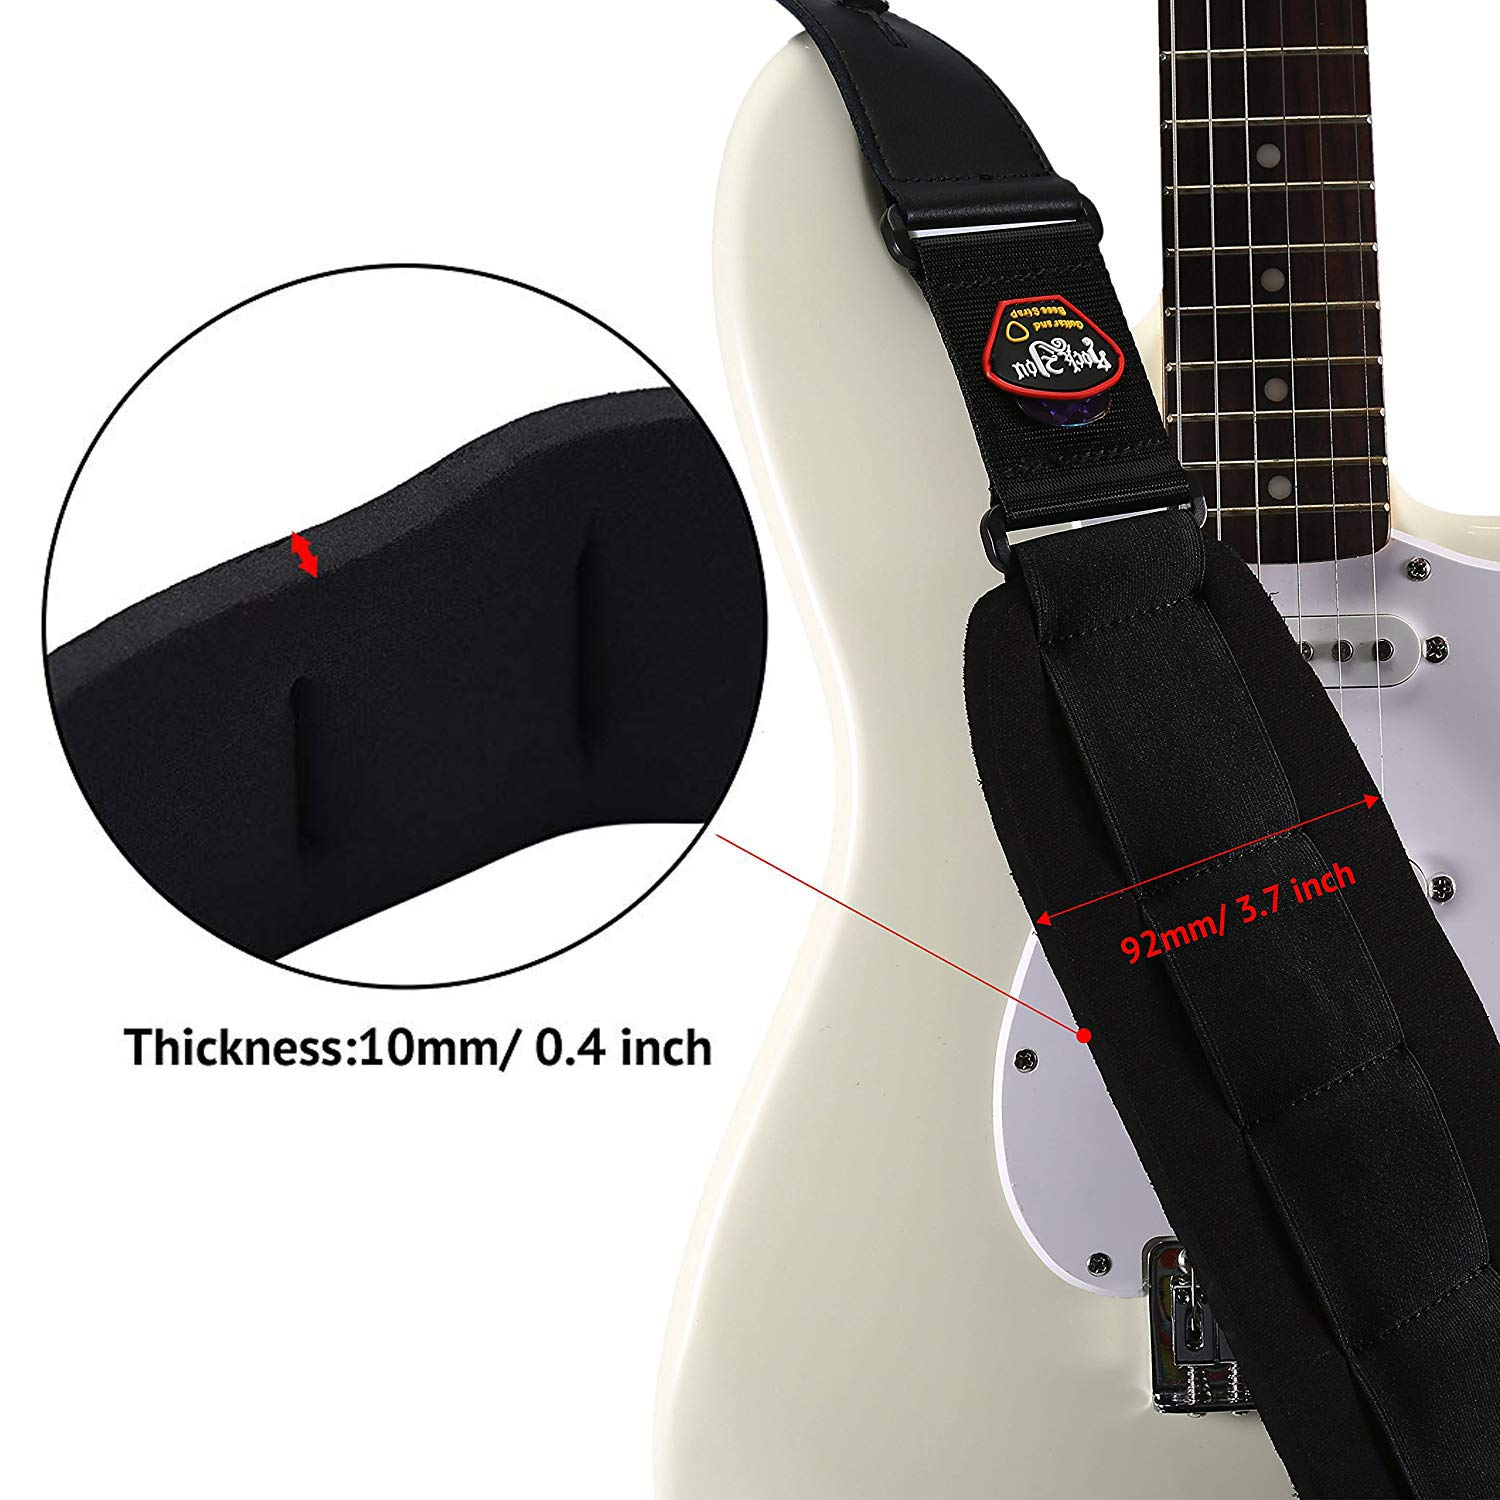 Updated-Long Asmuse Bass Strap Padded Guitar Strap with Leather Ends and 3.7 inch Wide Neoprene SBR Memory Foam plus Inside Pick Holder for Heavy Bass and Guitars Adjustable Length from 47’’ to 60’’ 